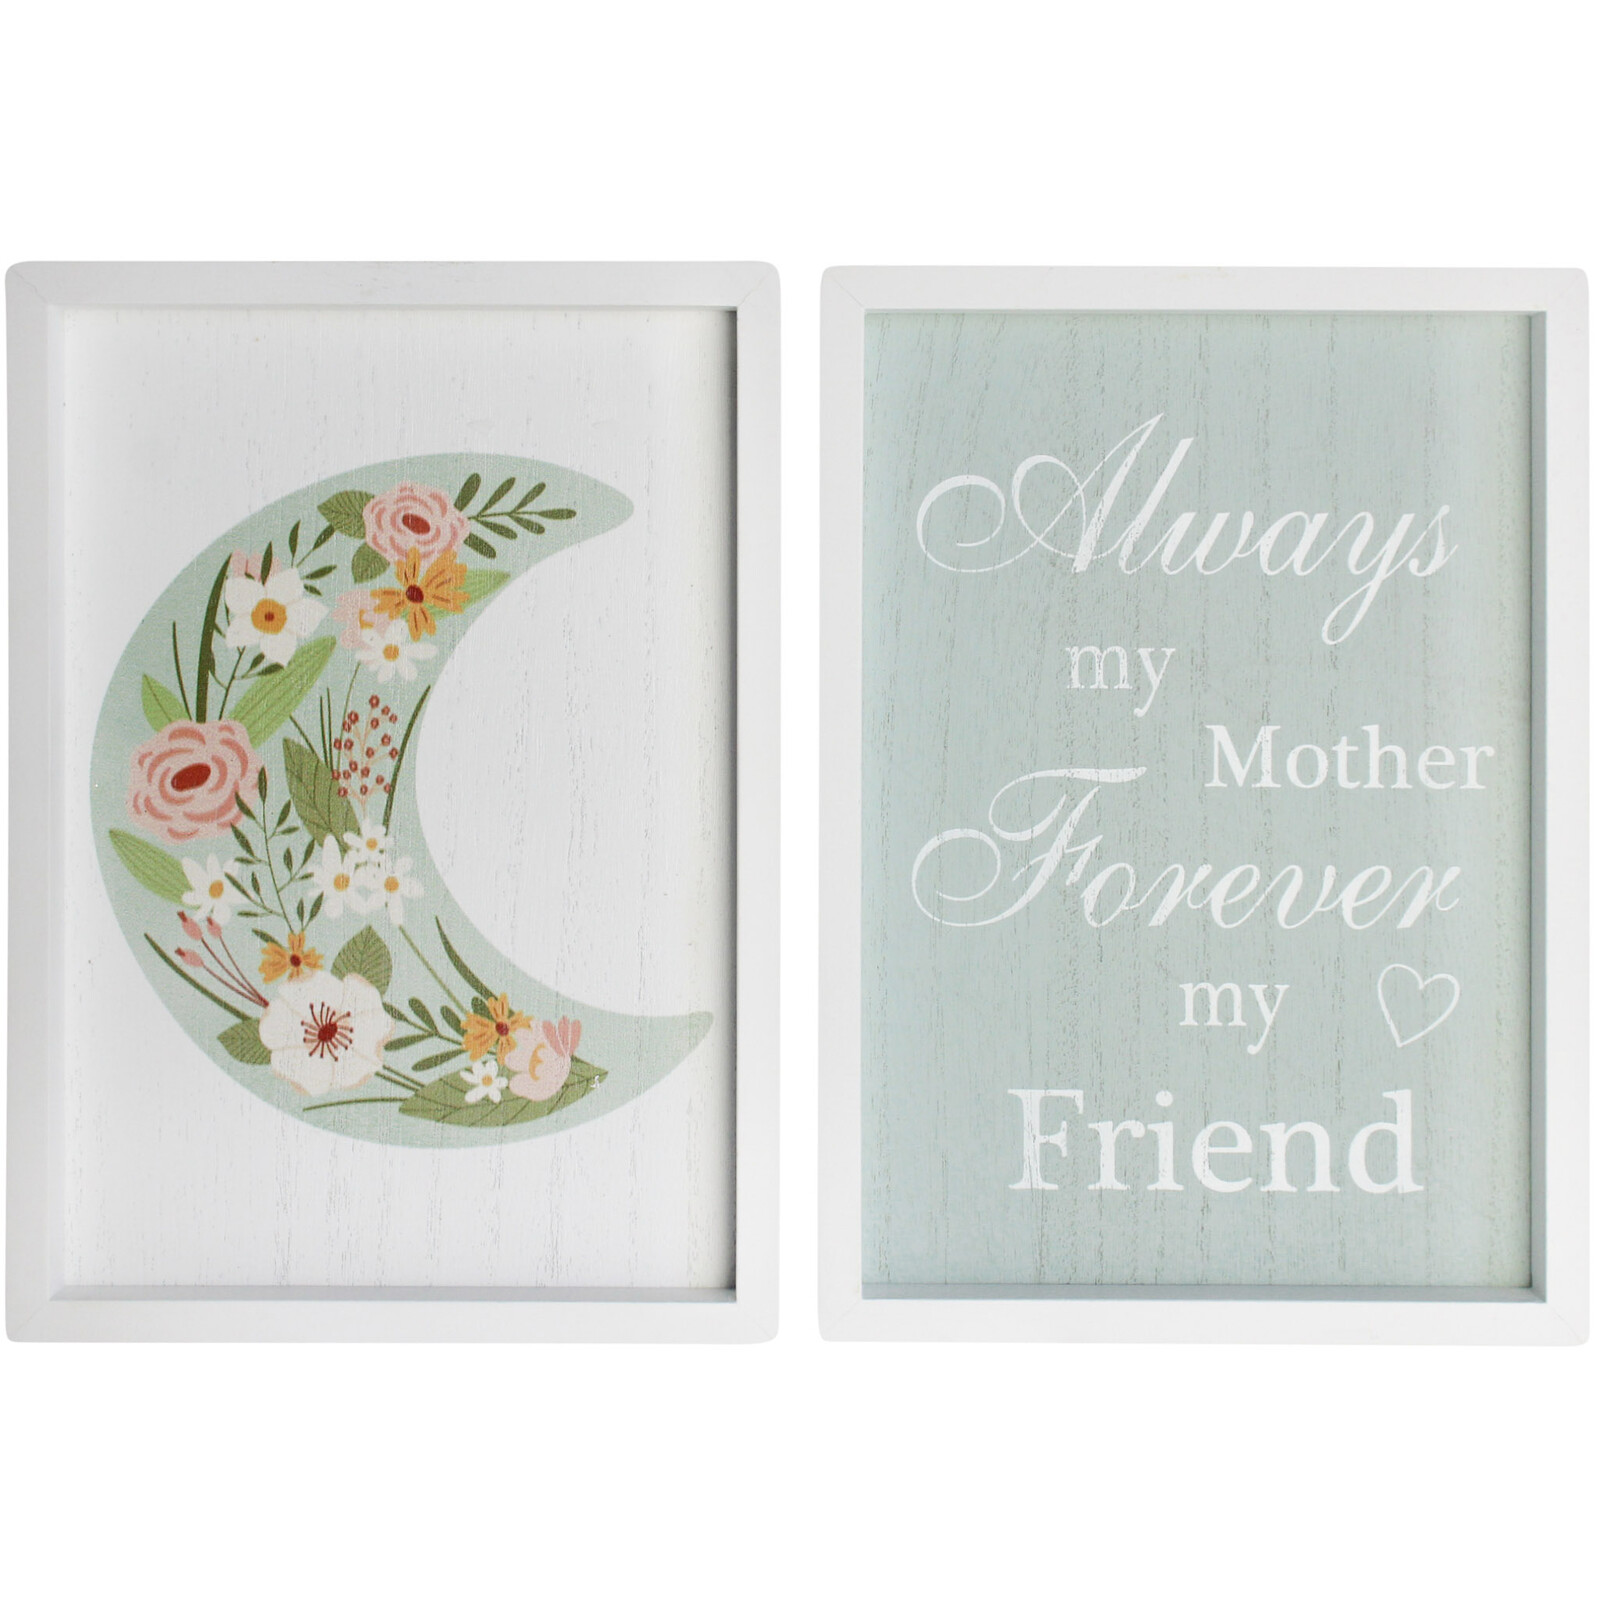 Sign S/2 Mother Friend